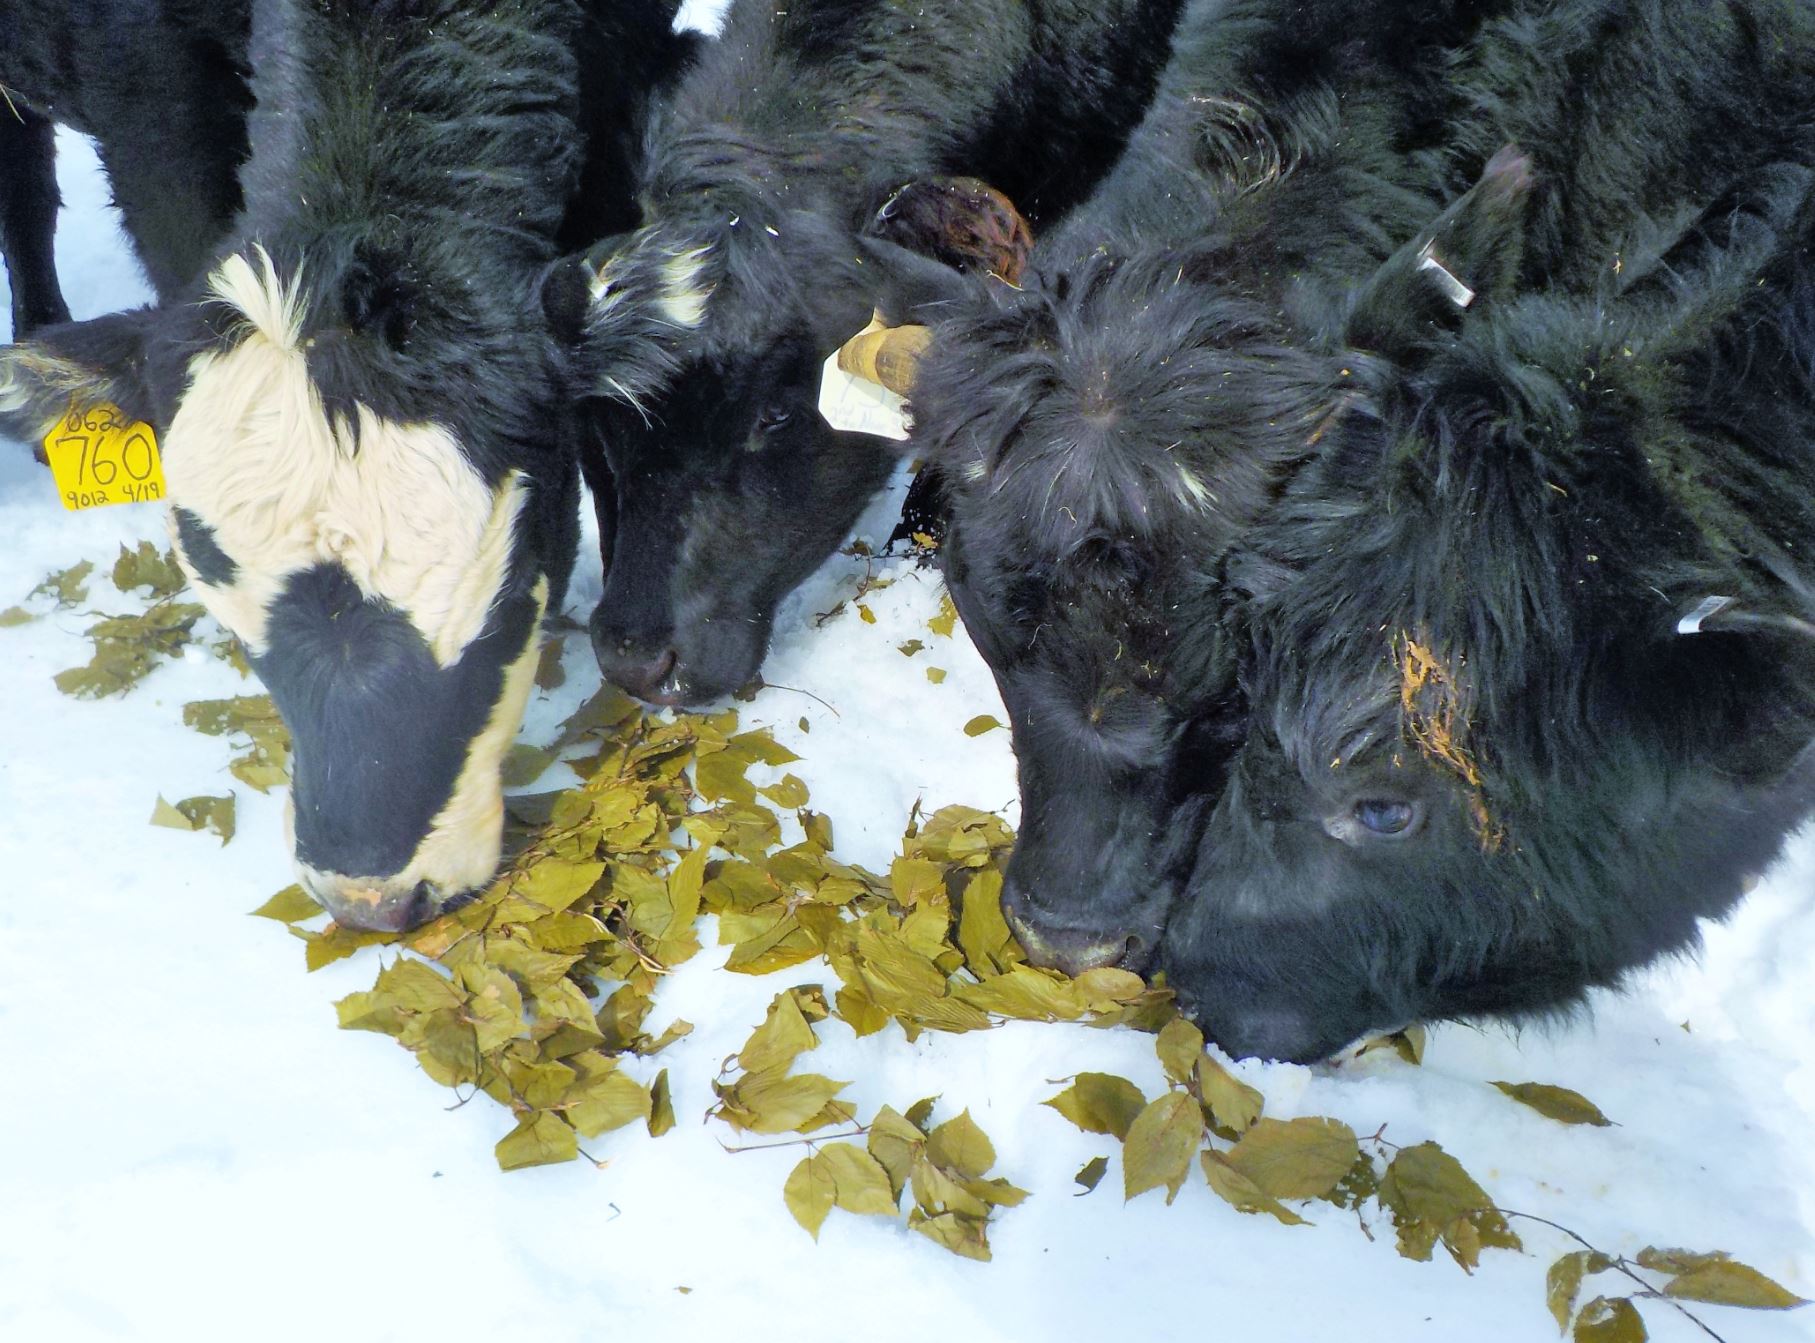 Figure 3. Black Angus cattle at Meadowsweet Farm sampling ensiled yellow birch leaves on the snow mid March.